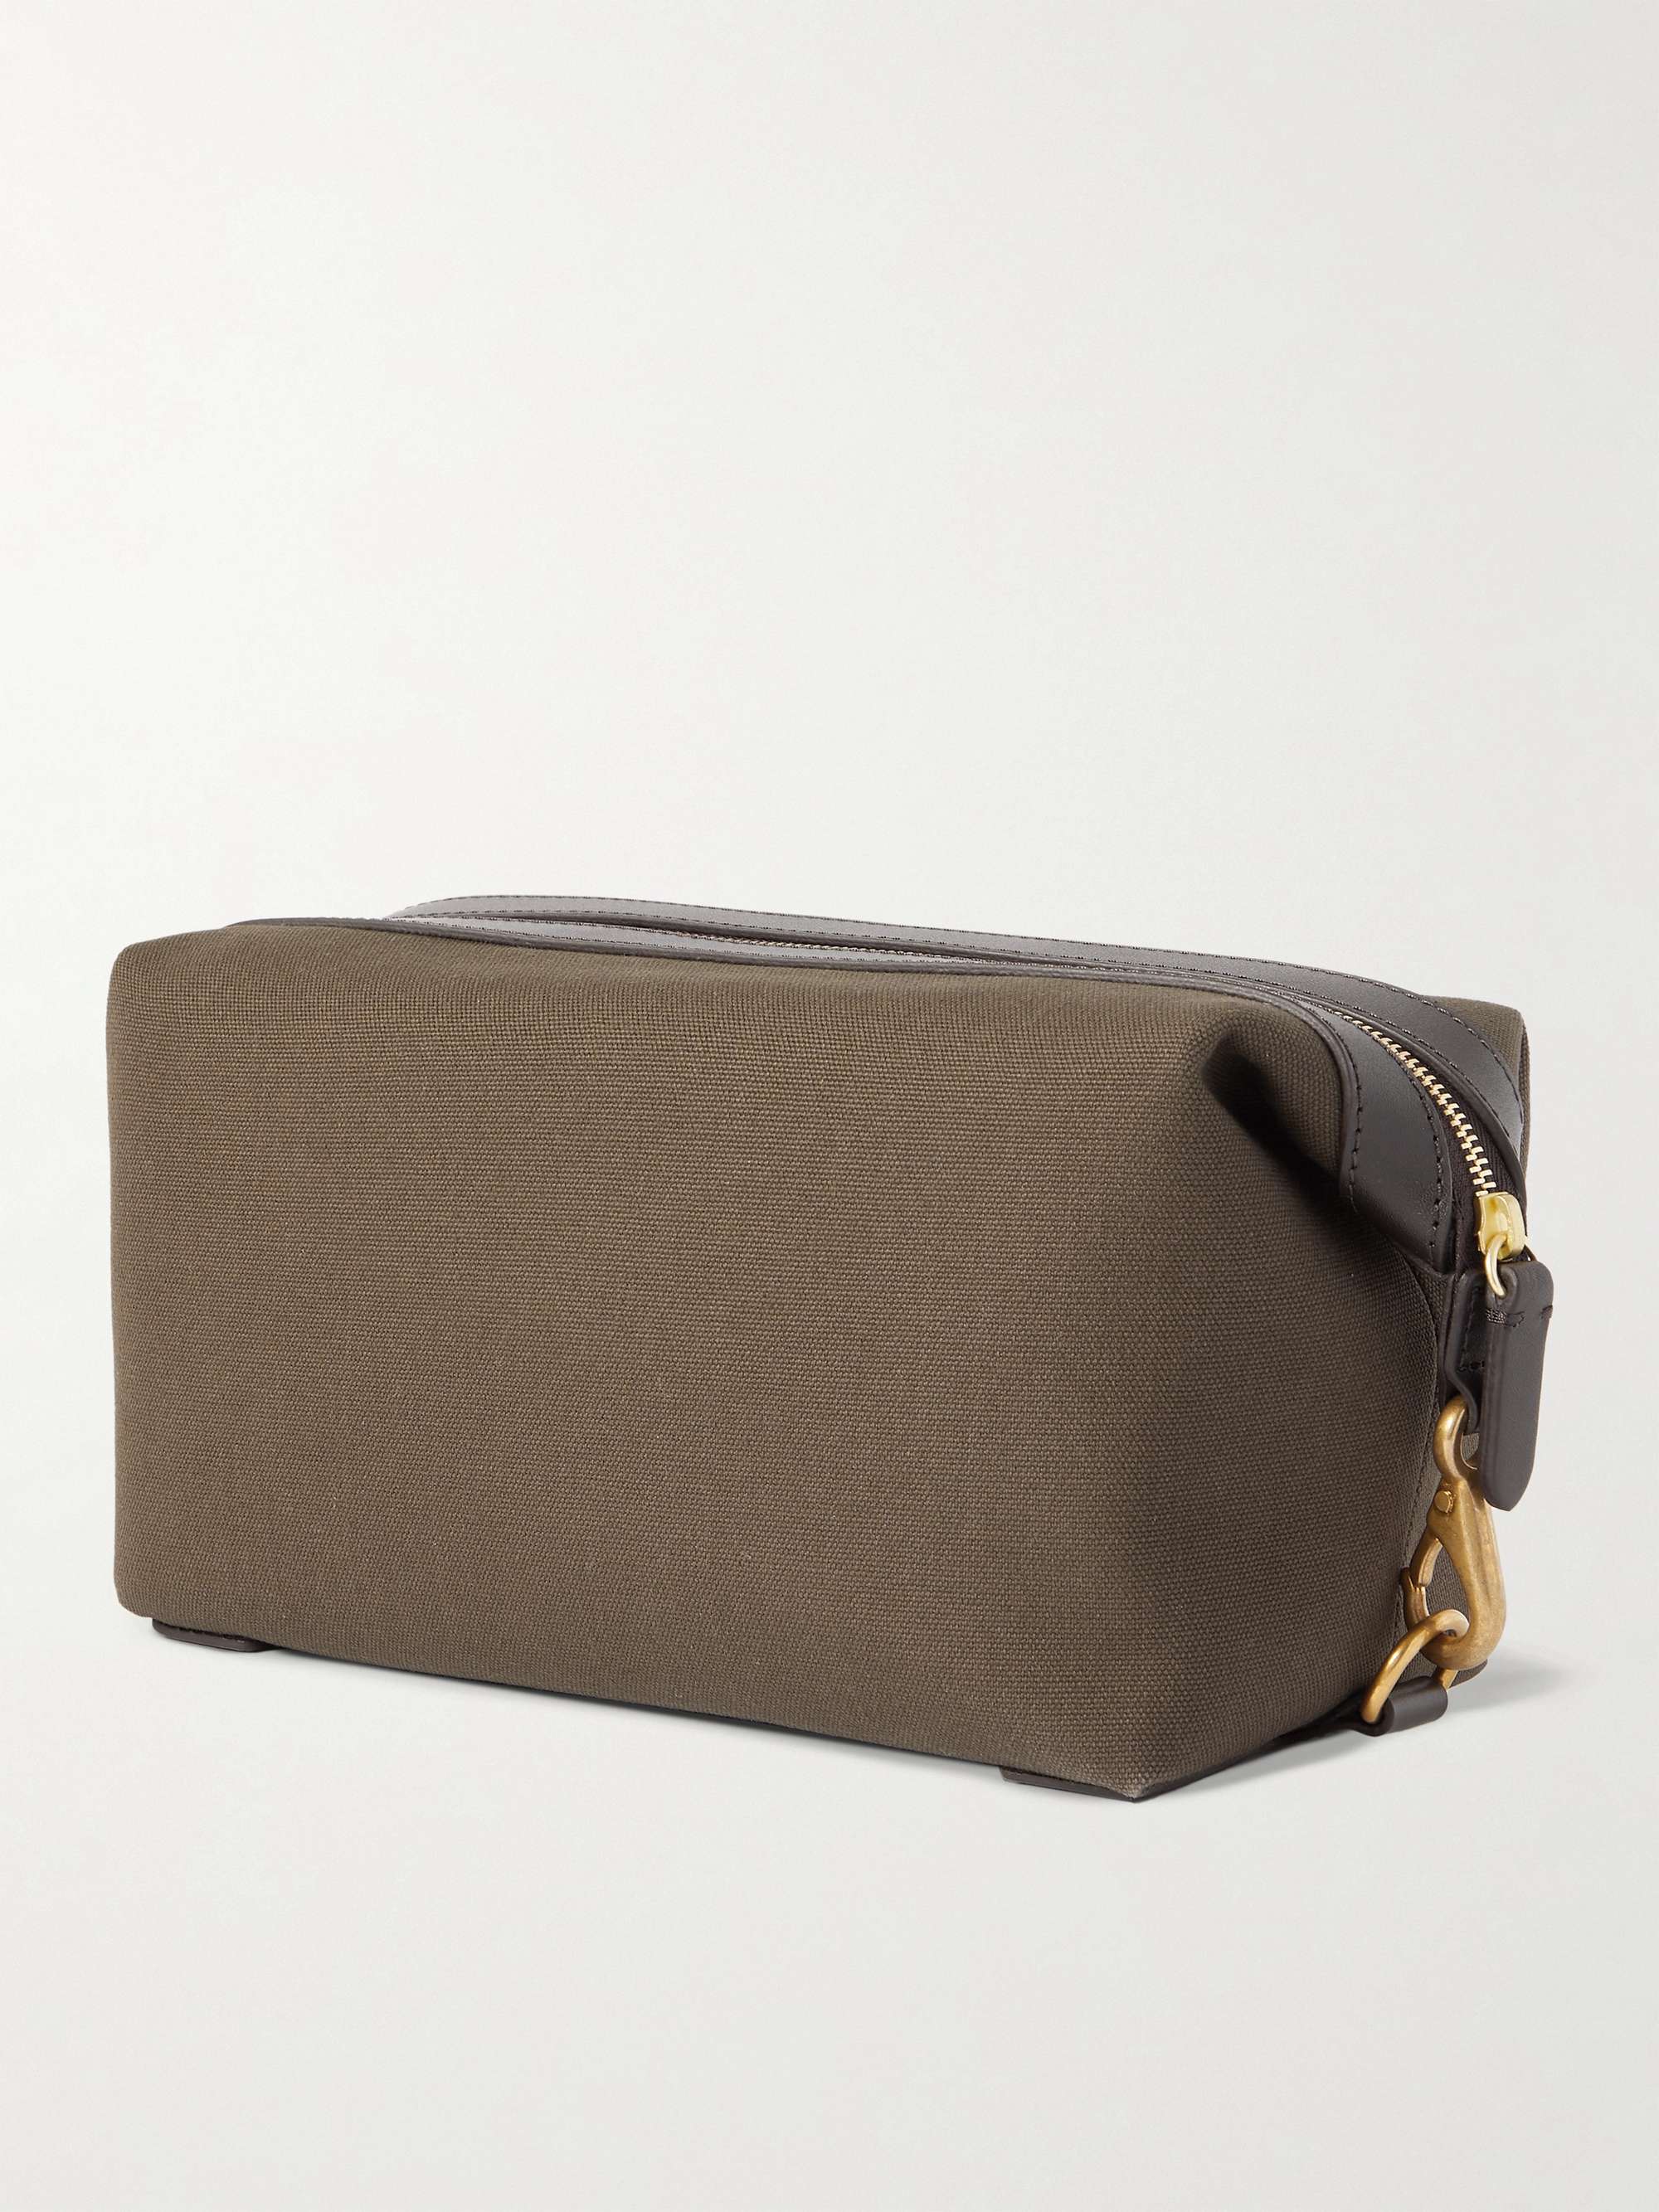 MISMO Leather-Trimmed Canvas Wash Bag